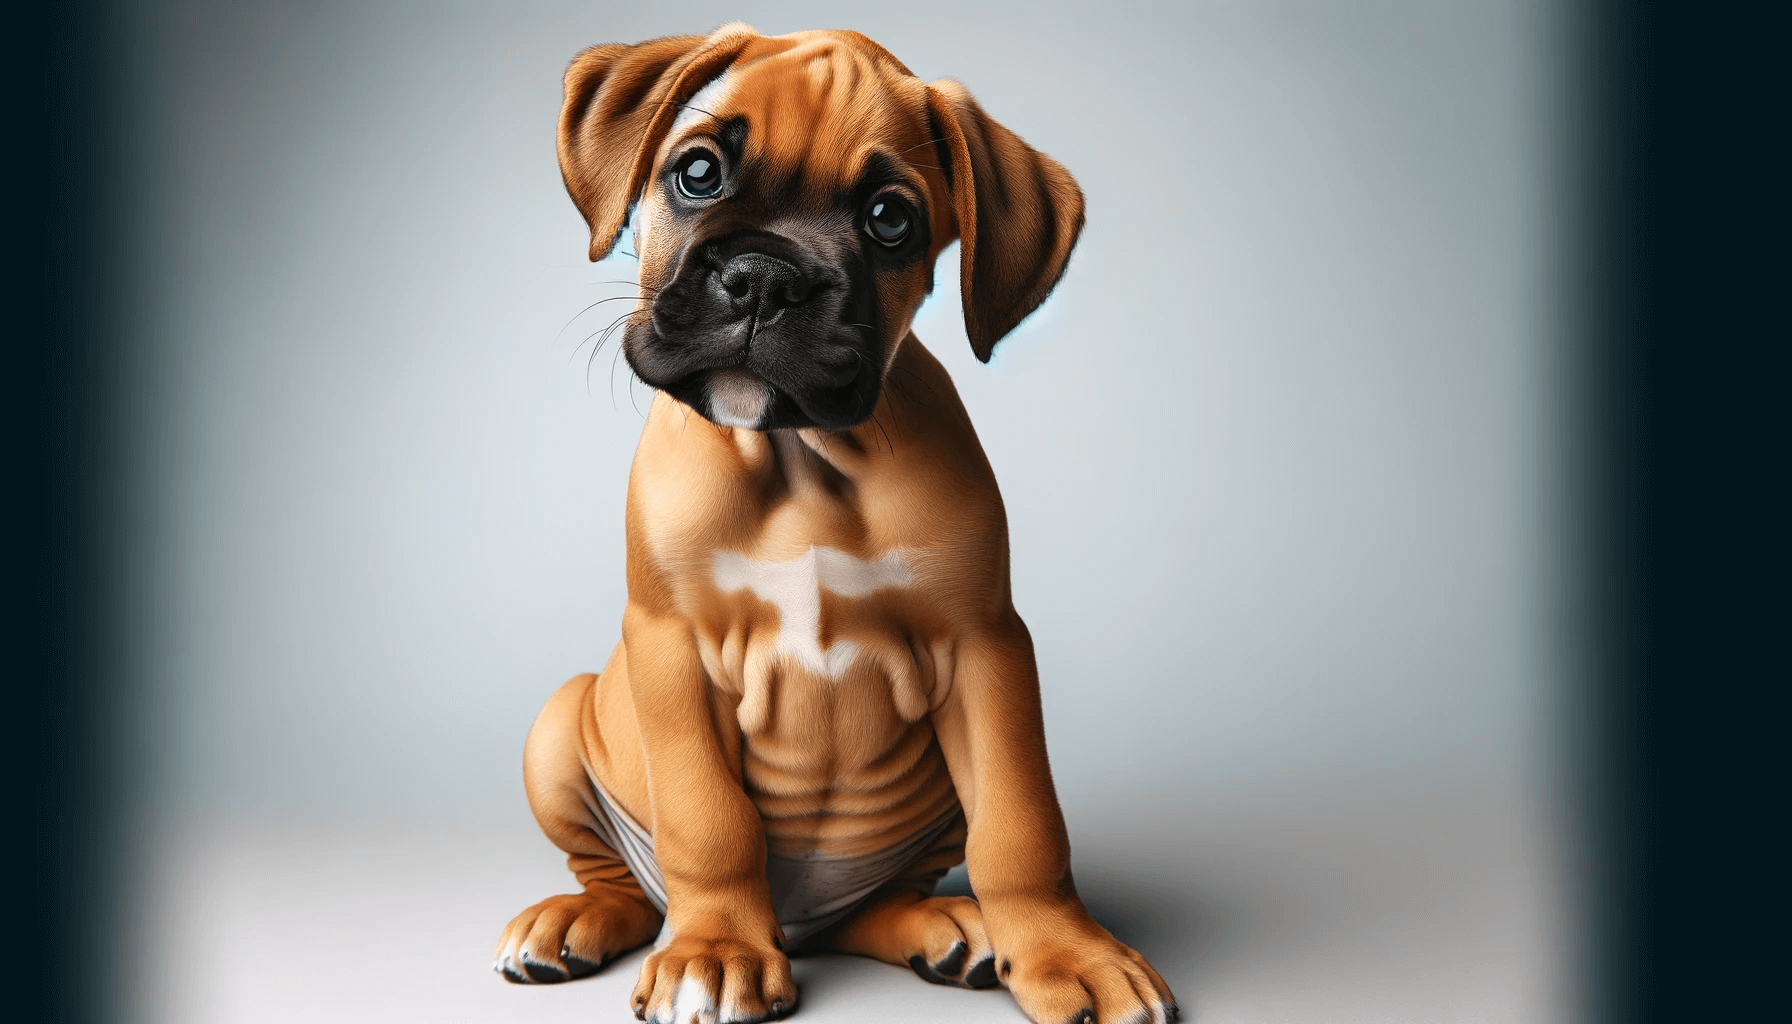 Adorable Boxador (Boxer Lab Mix) puppy with a tan coat, sitting and tilting its head slightly with an inquisitive expression.